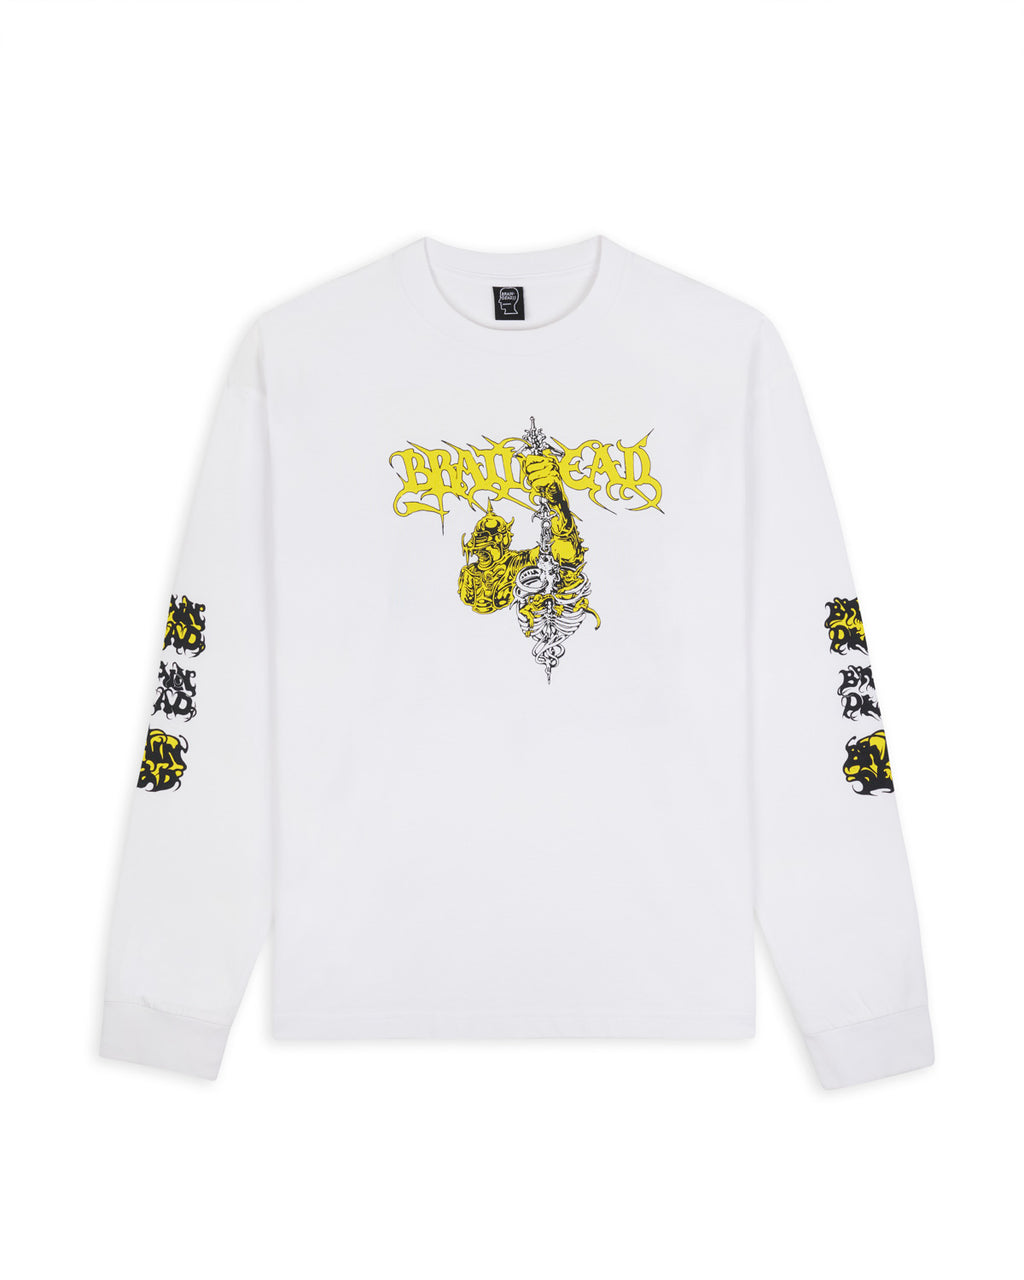 Knight Buster Long Sleeve T-Shirt - White